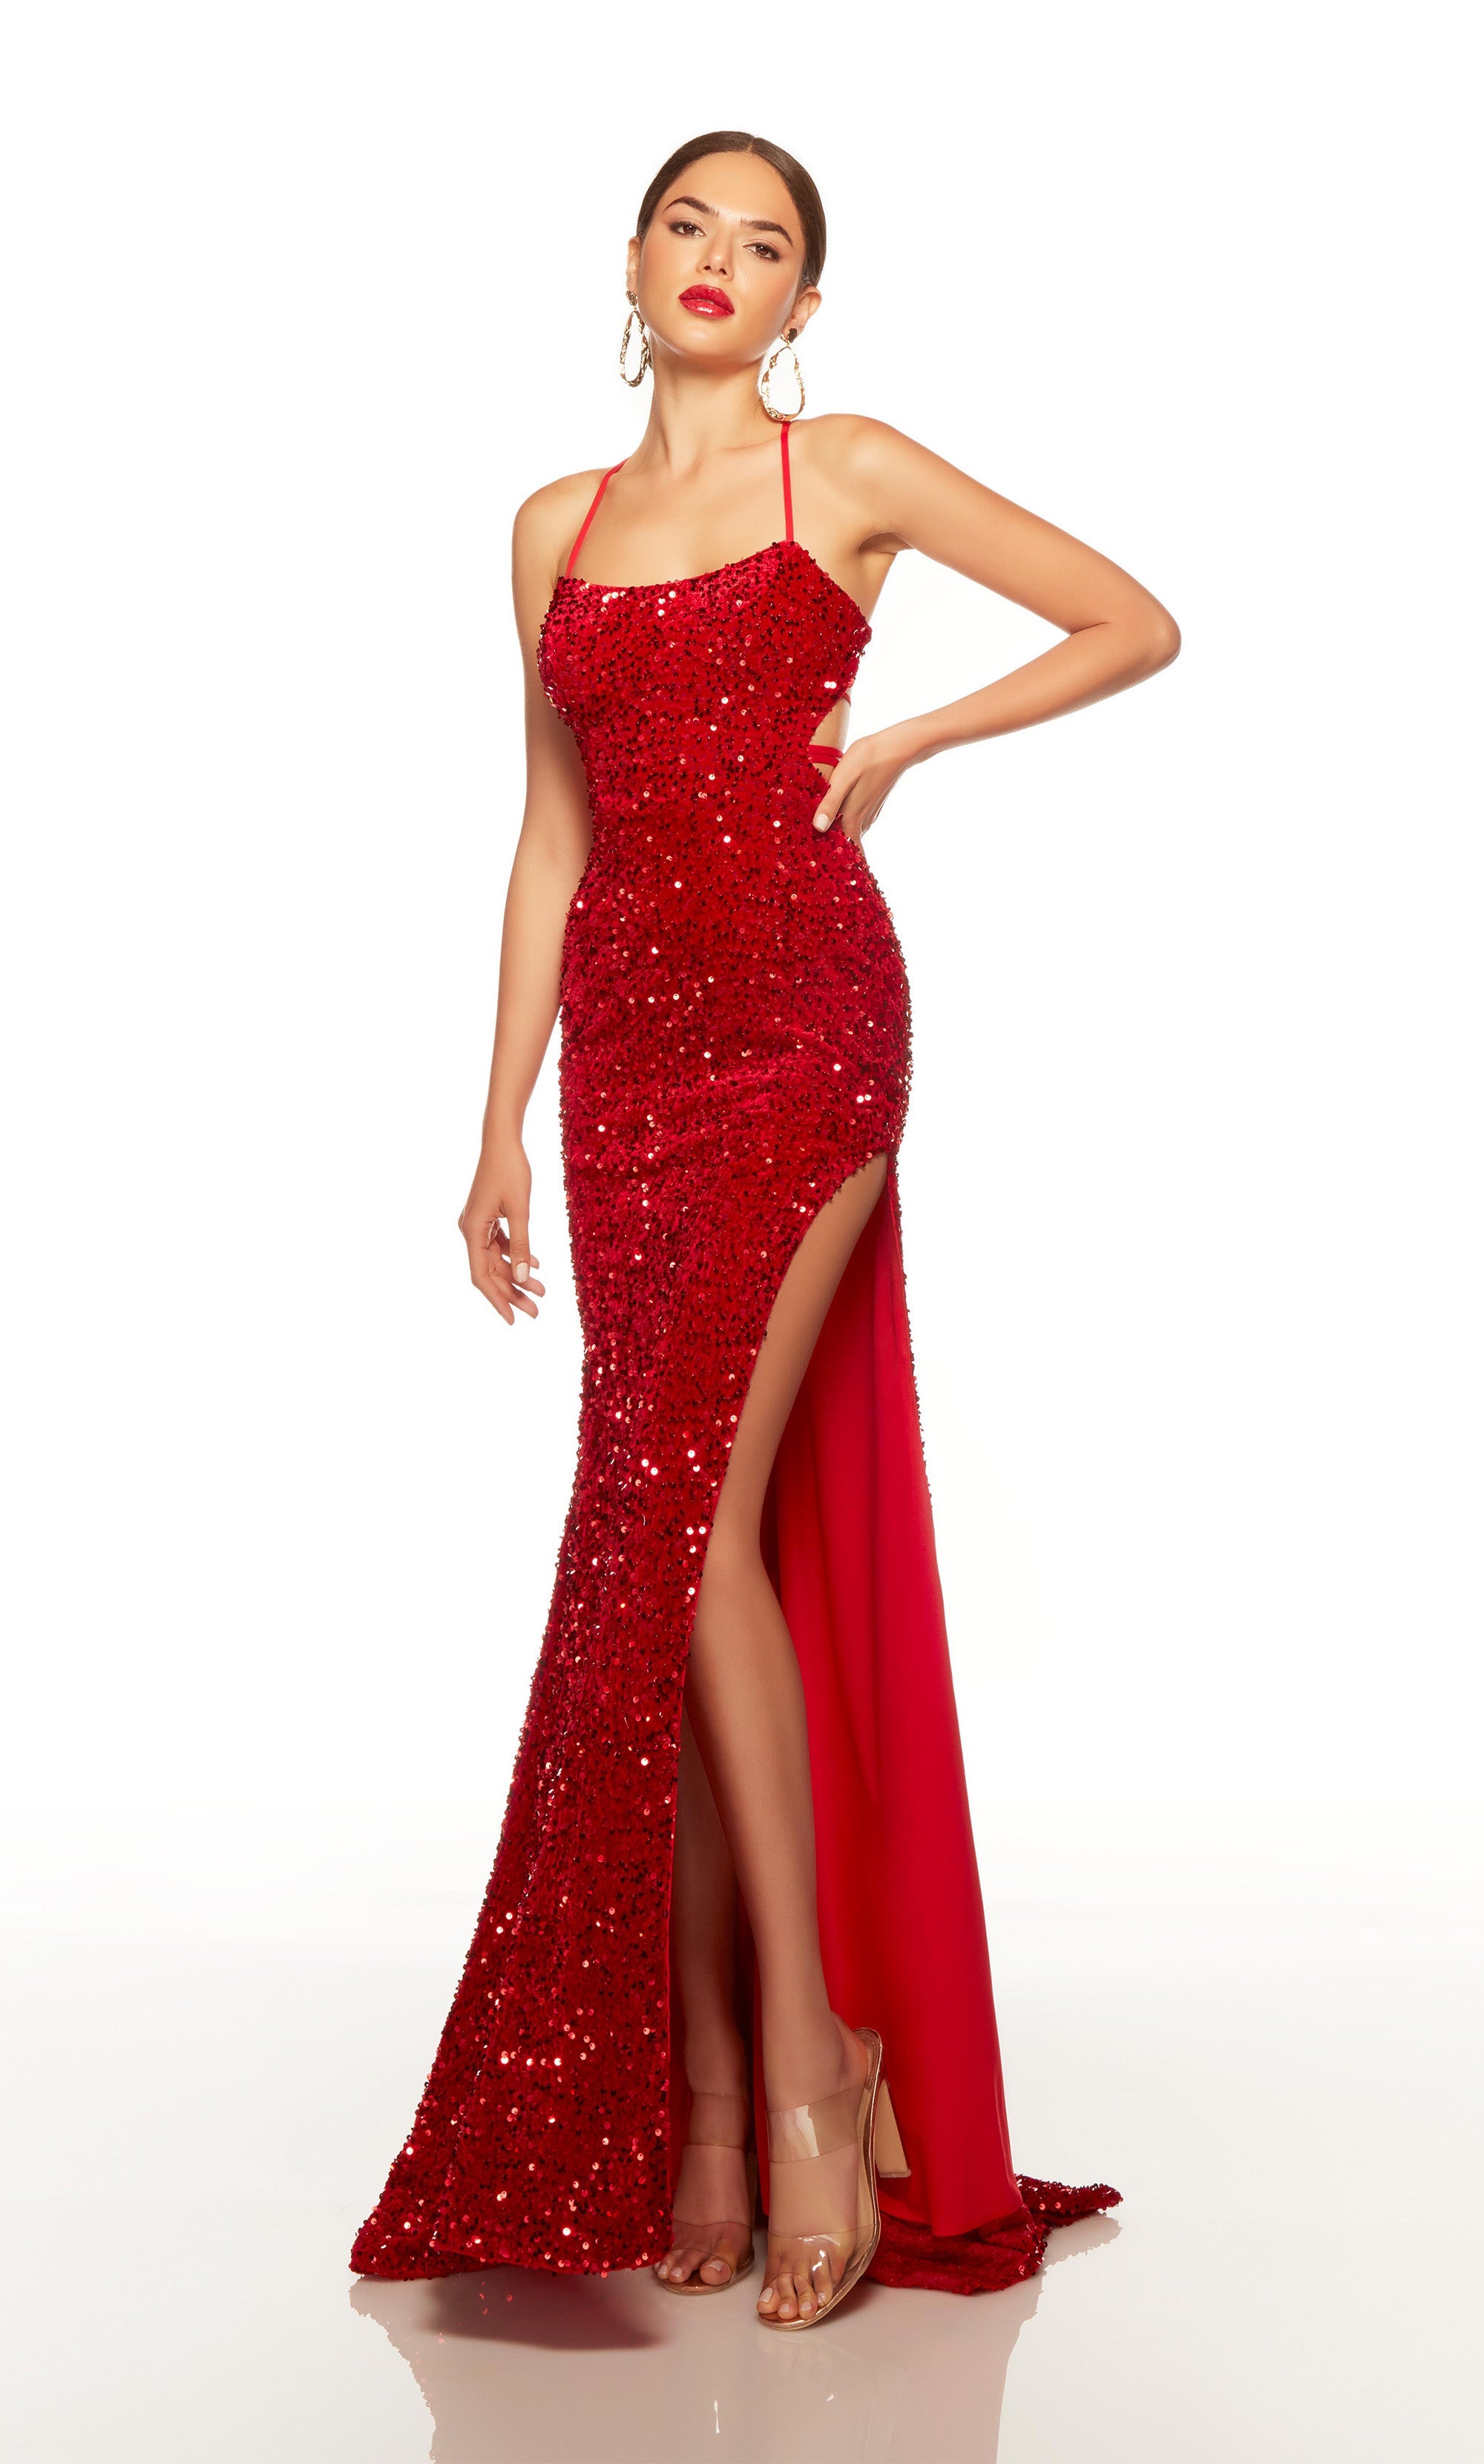 Strappy Back Sequin Long Gown 61333 – Sparkly Gowns